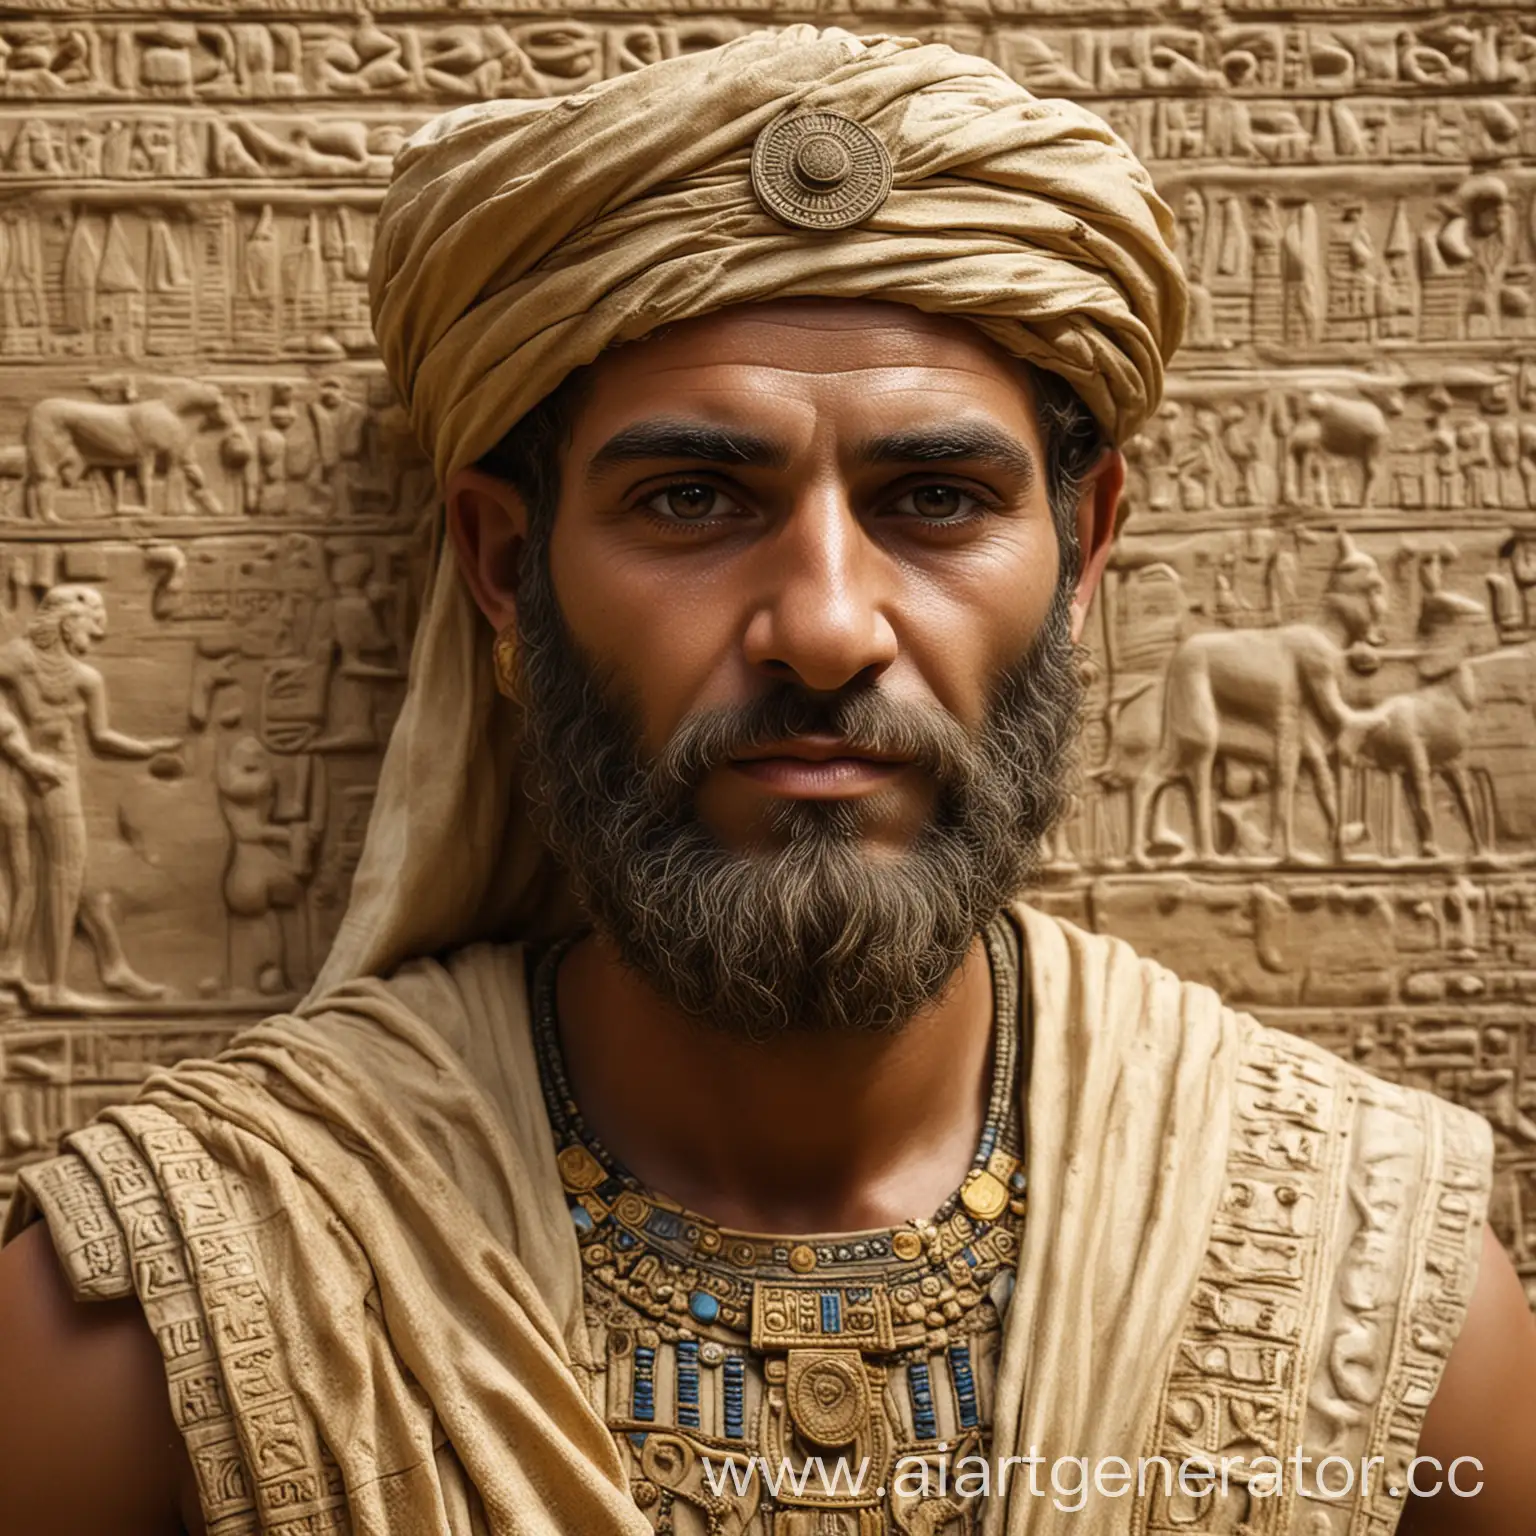 Wealthy-Babylonian-Resident-in-Lavish-Attire-and-Ornate-Surroundings